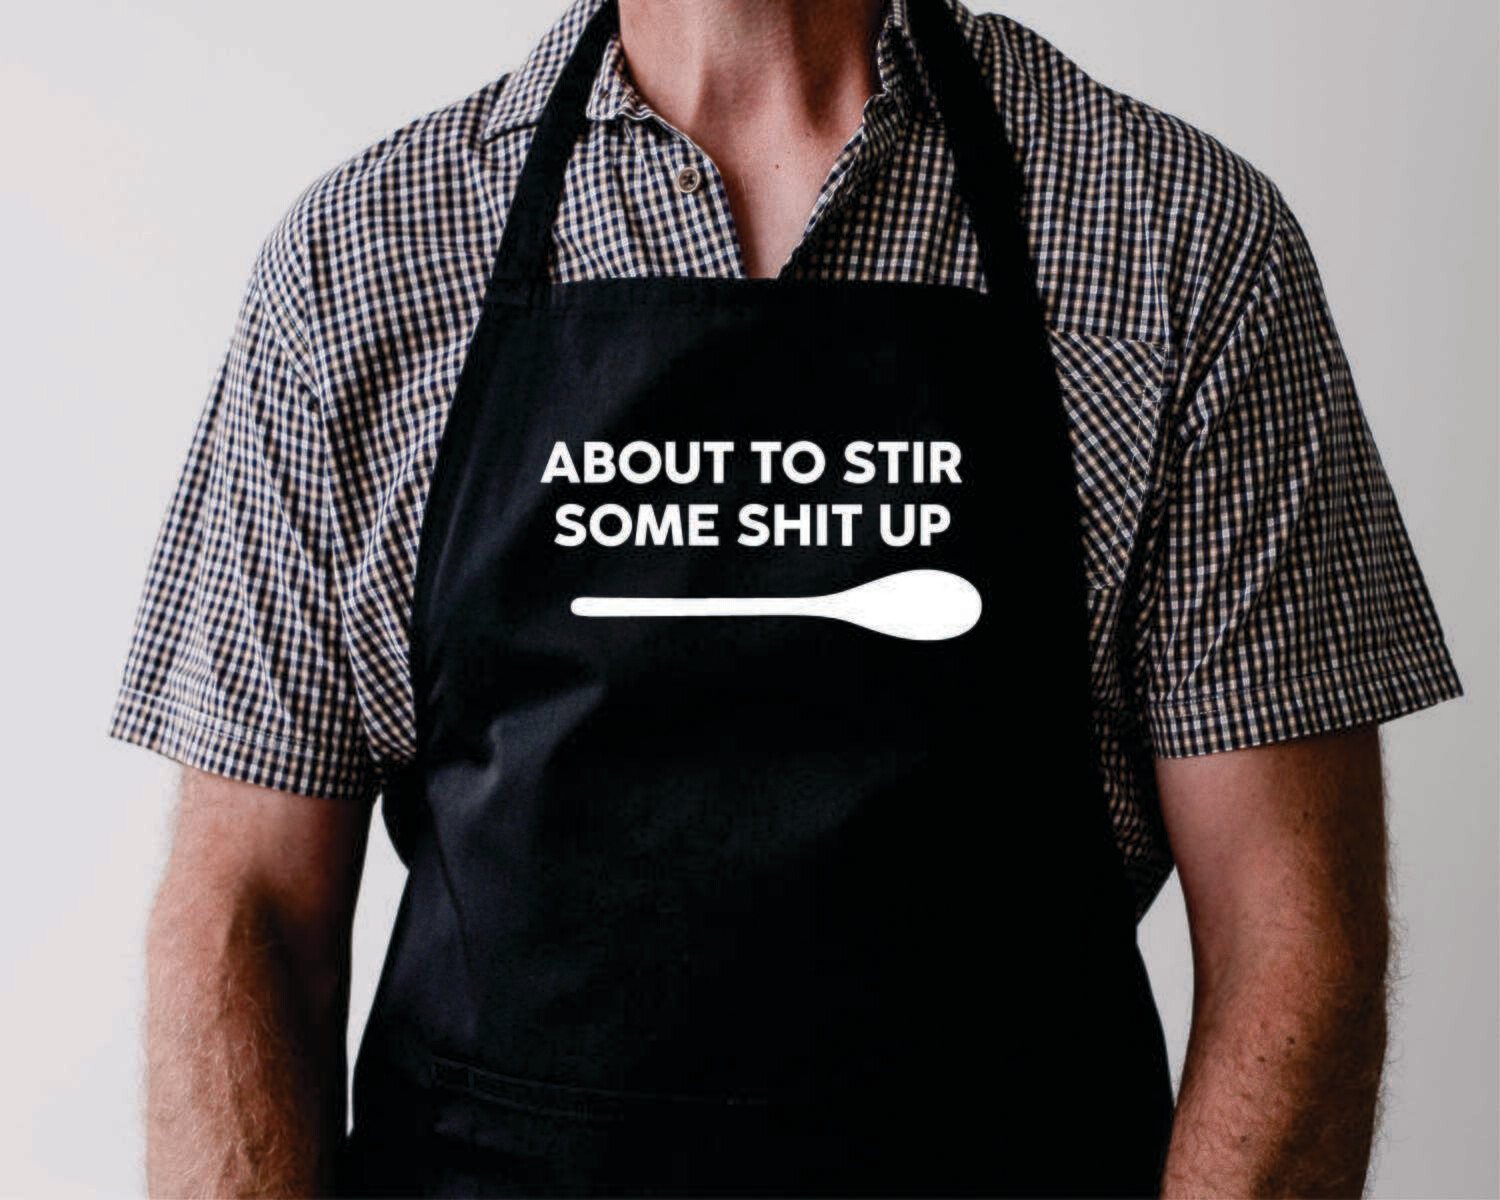 About To Stir Some Sh!t Up Apron